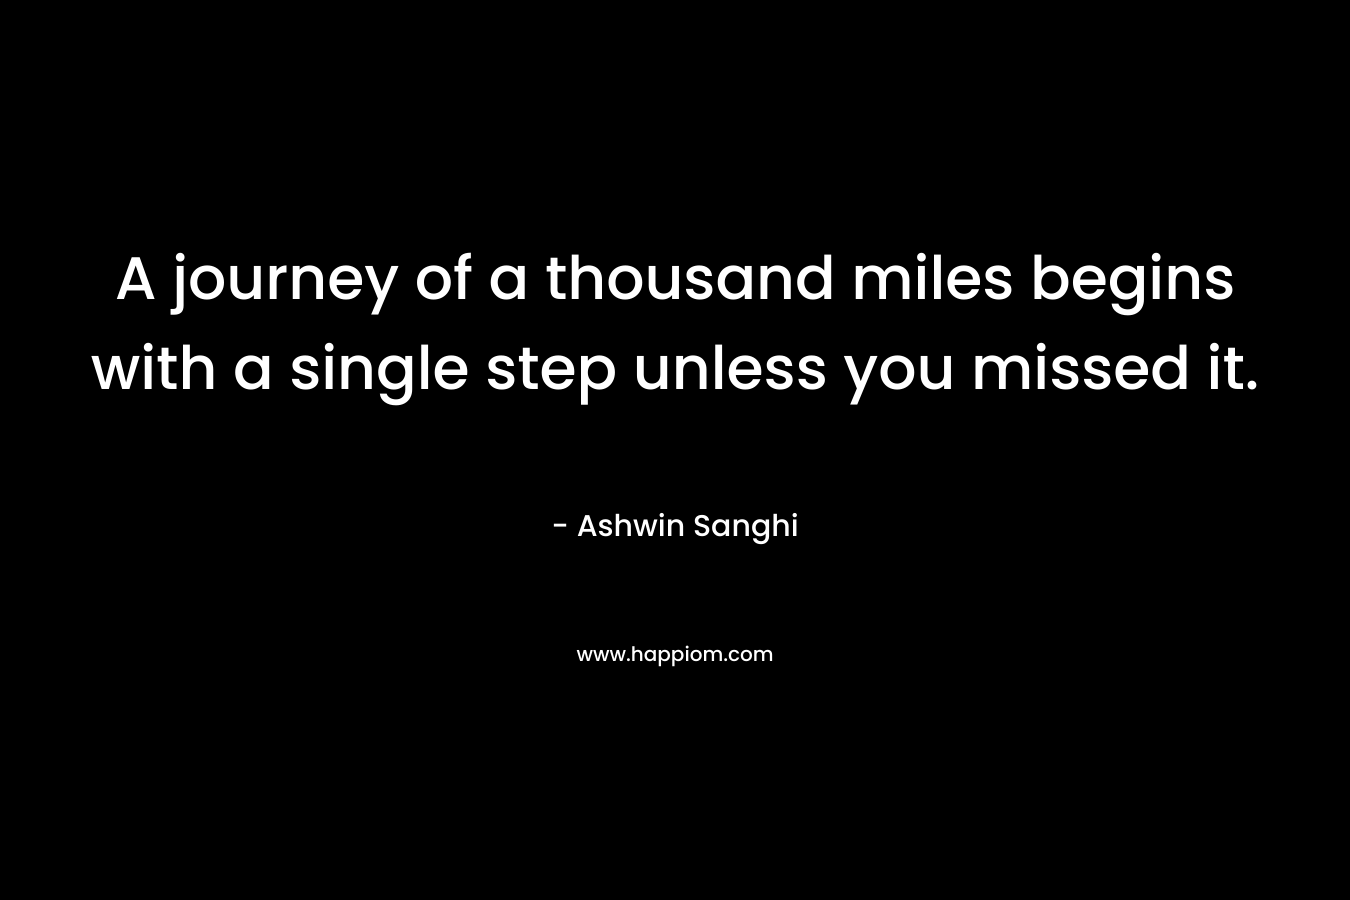 A journey of a thousand miles begins with a single step unless you missed it.